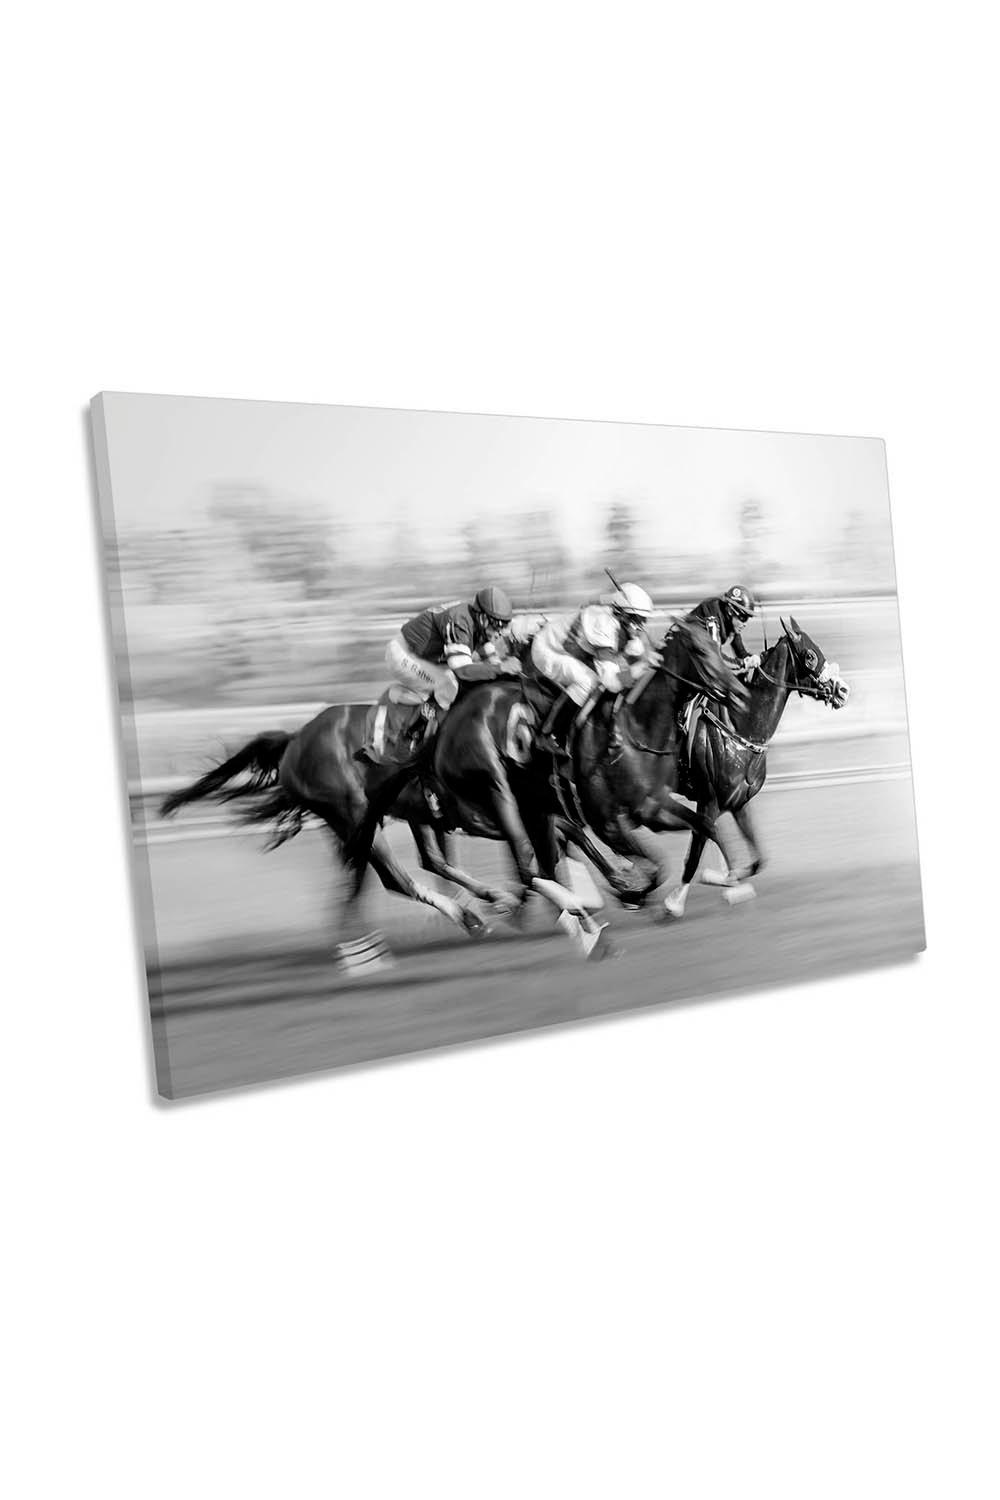 Horse racing Jockey Queen's Plate Canvas Wall Art Picture Print